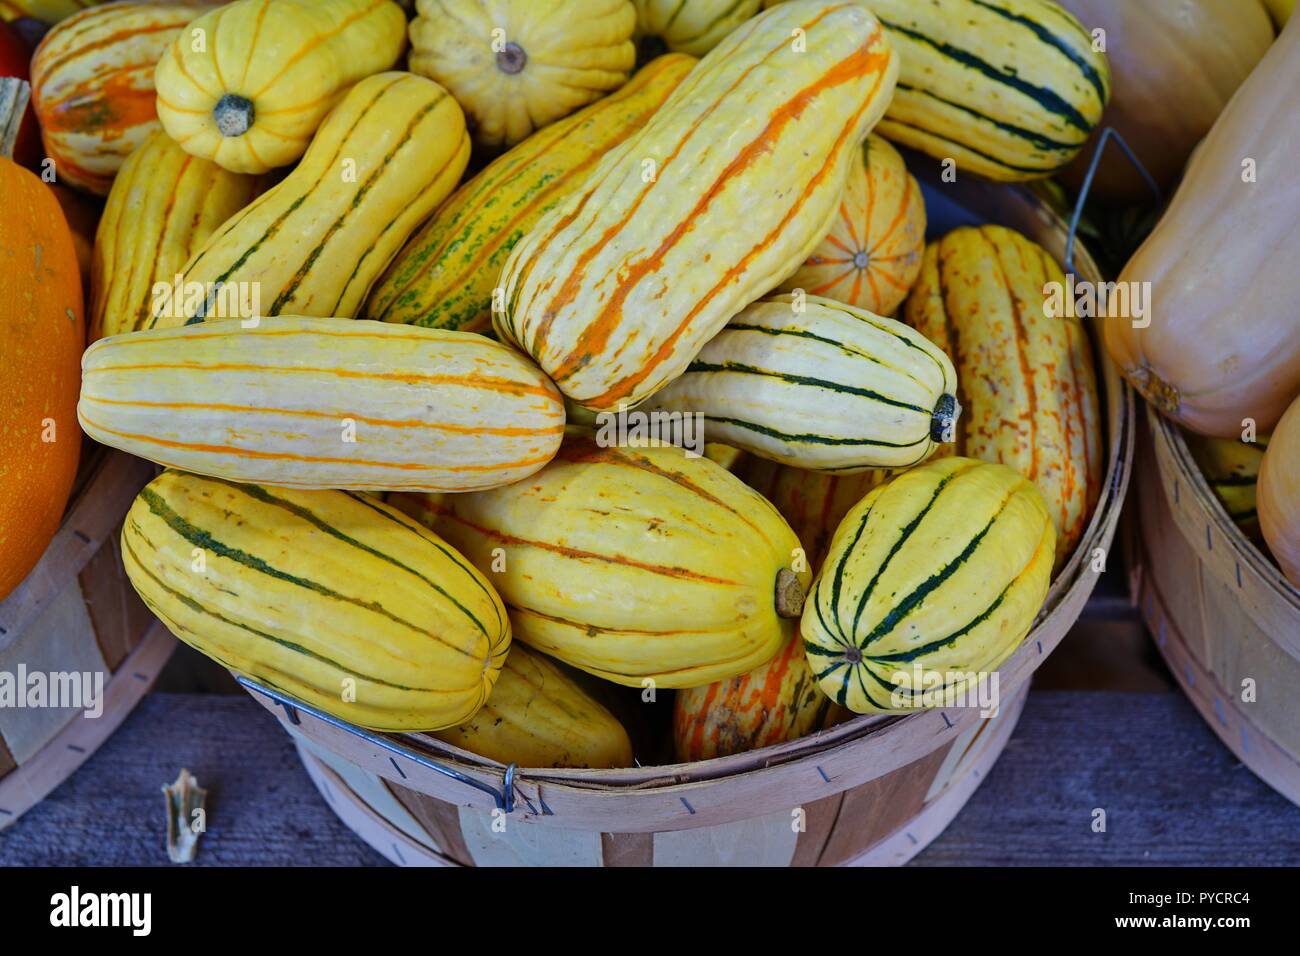 Basket of striped yellow and green delicata squash in the fall Stock Photo